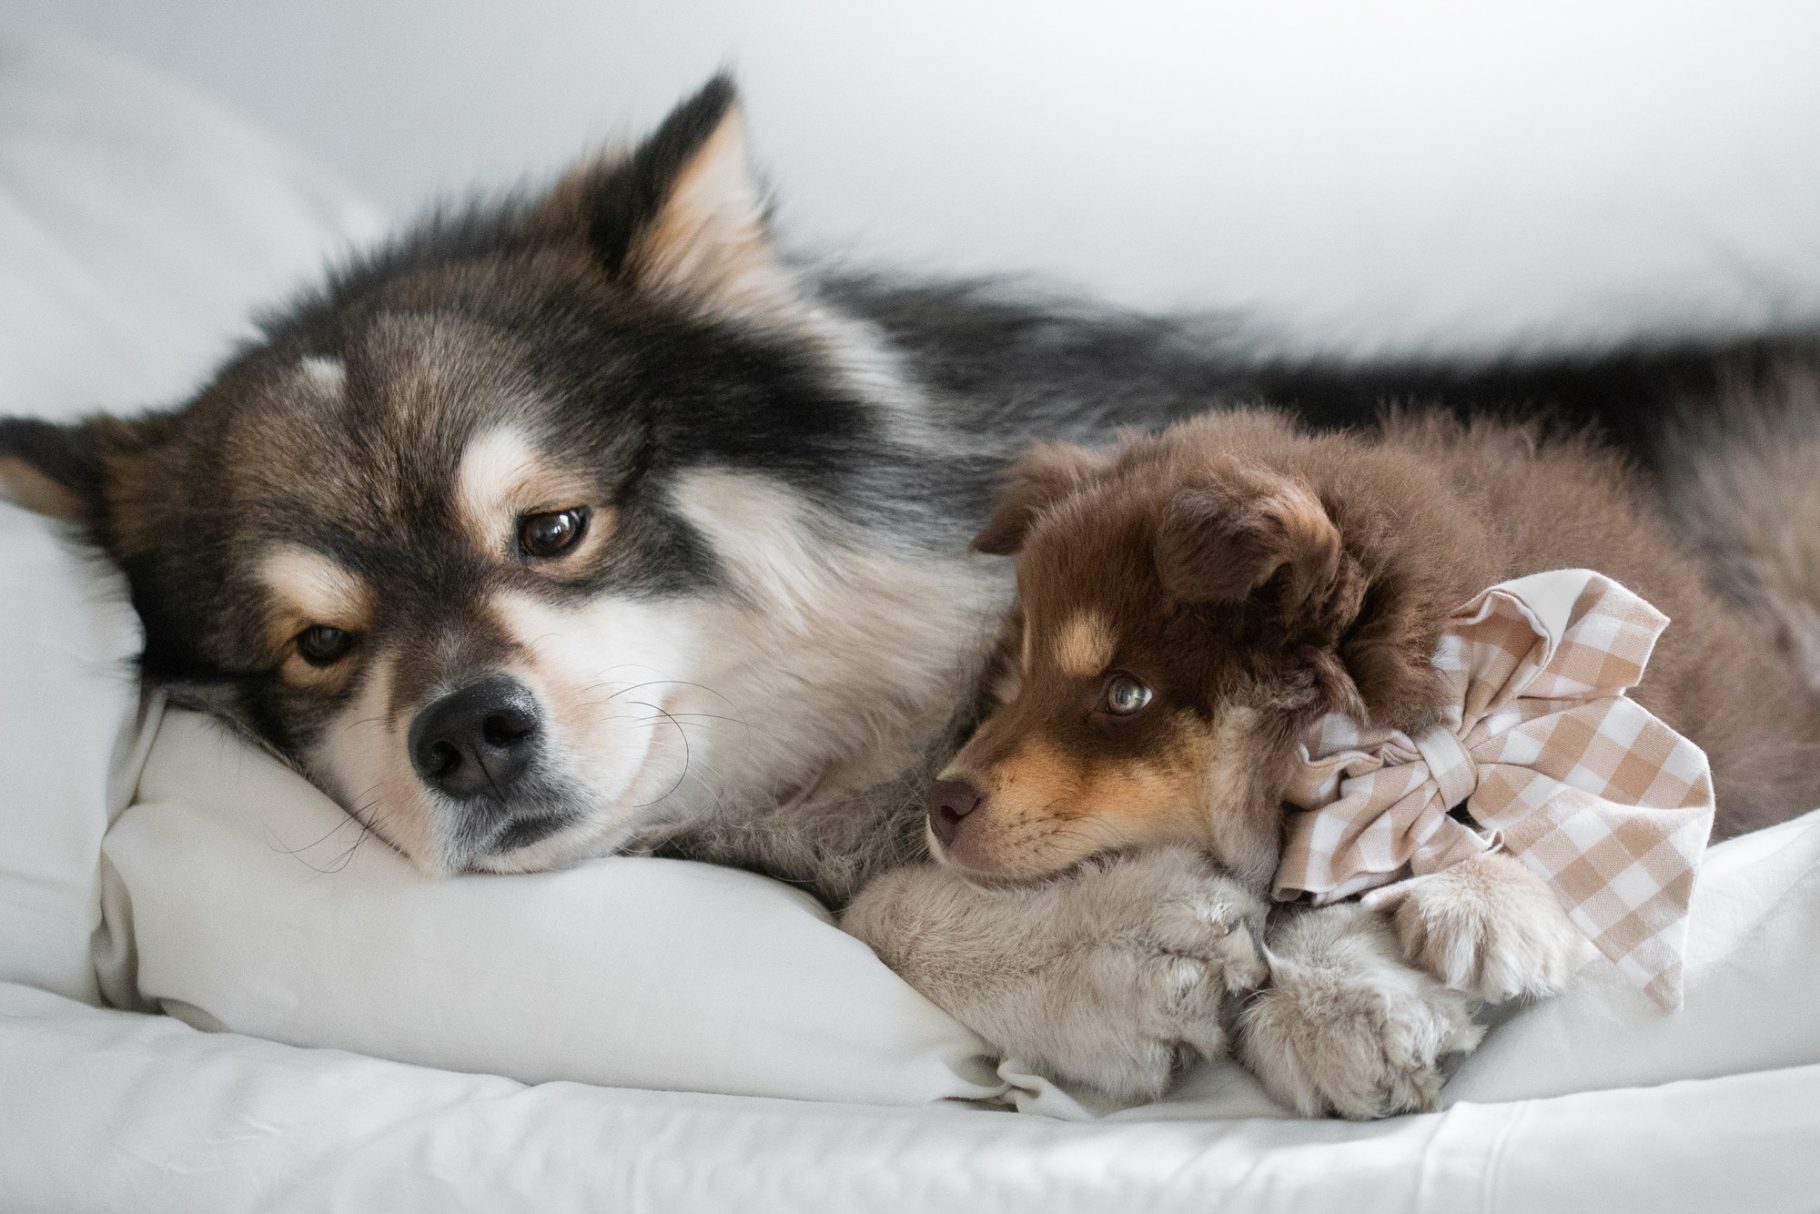 portrait-of-a-young-finnish-lapphund-dog-and-puppy-lying-in-bed-together-e1657703025174.jpg